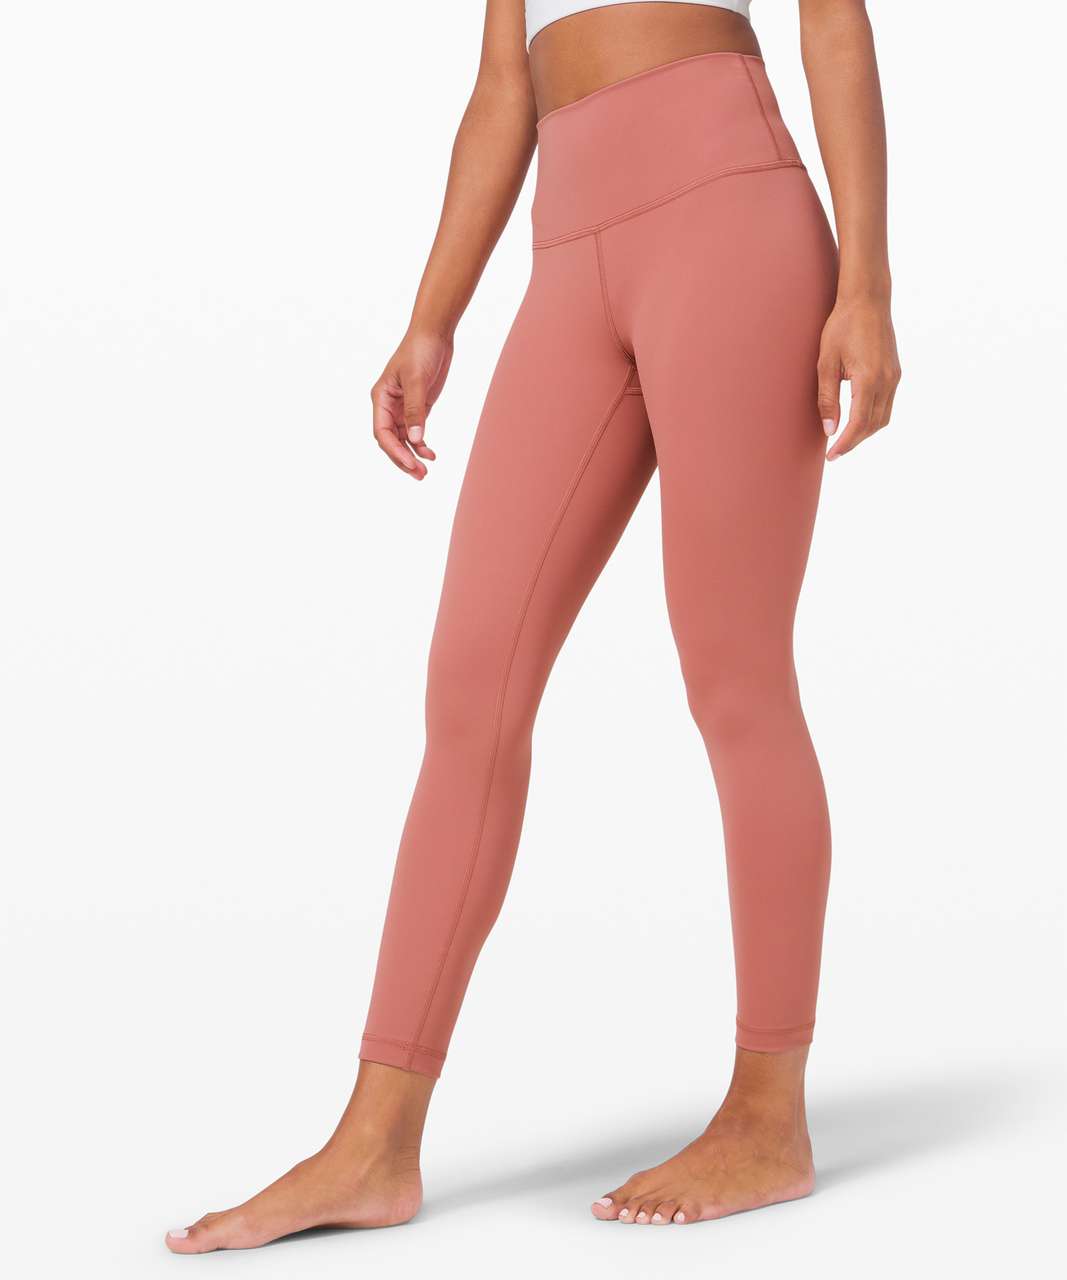 Lululemon Wunder Under High-Rise Tight 28" *Full-On Luxtreme - Brier Rose (First Release)